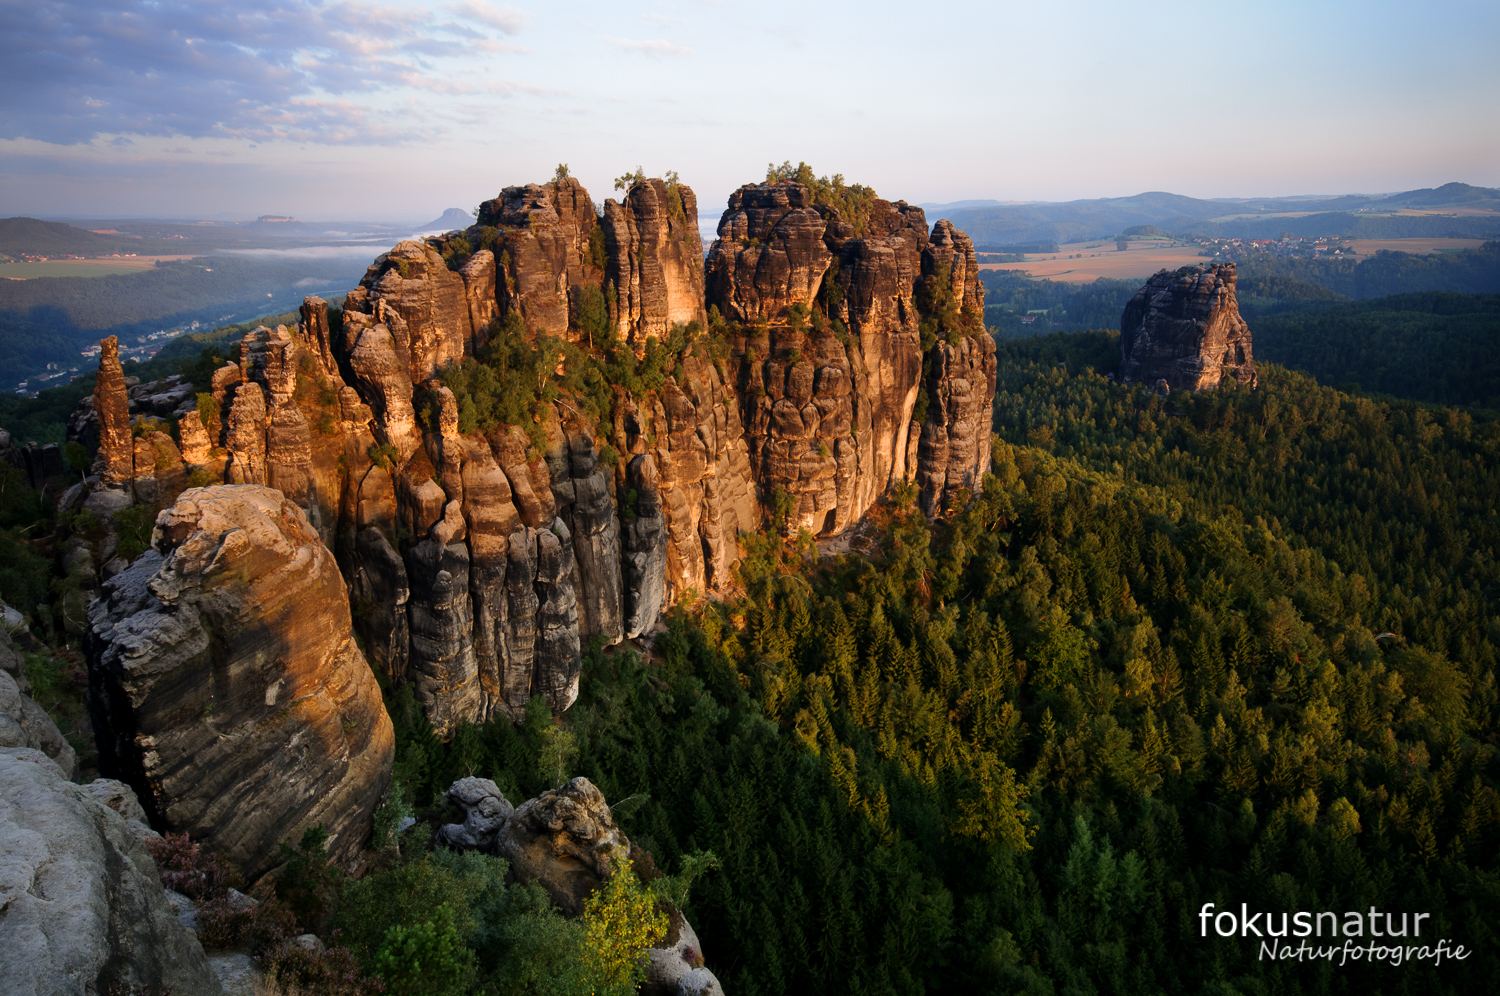 Mountains in the Saxonian Switzerland